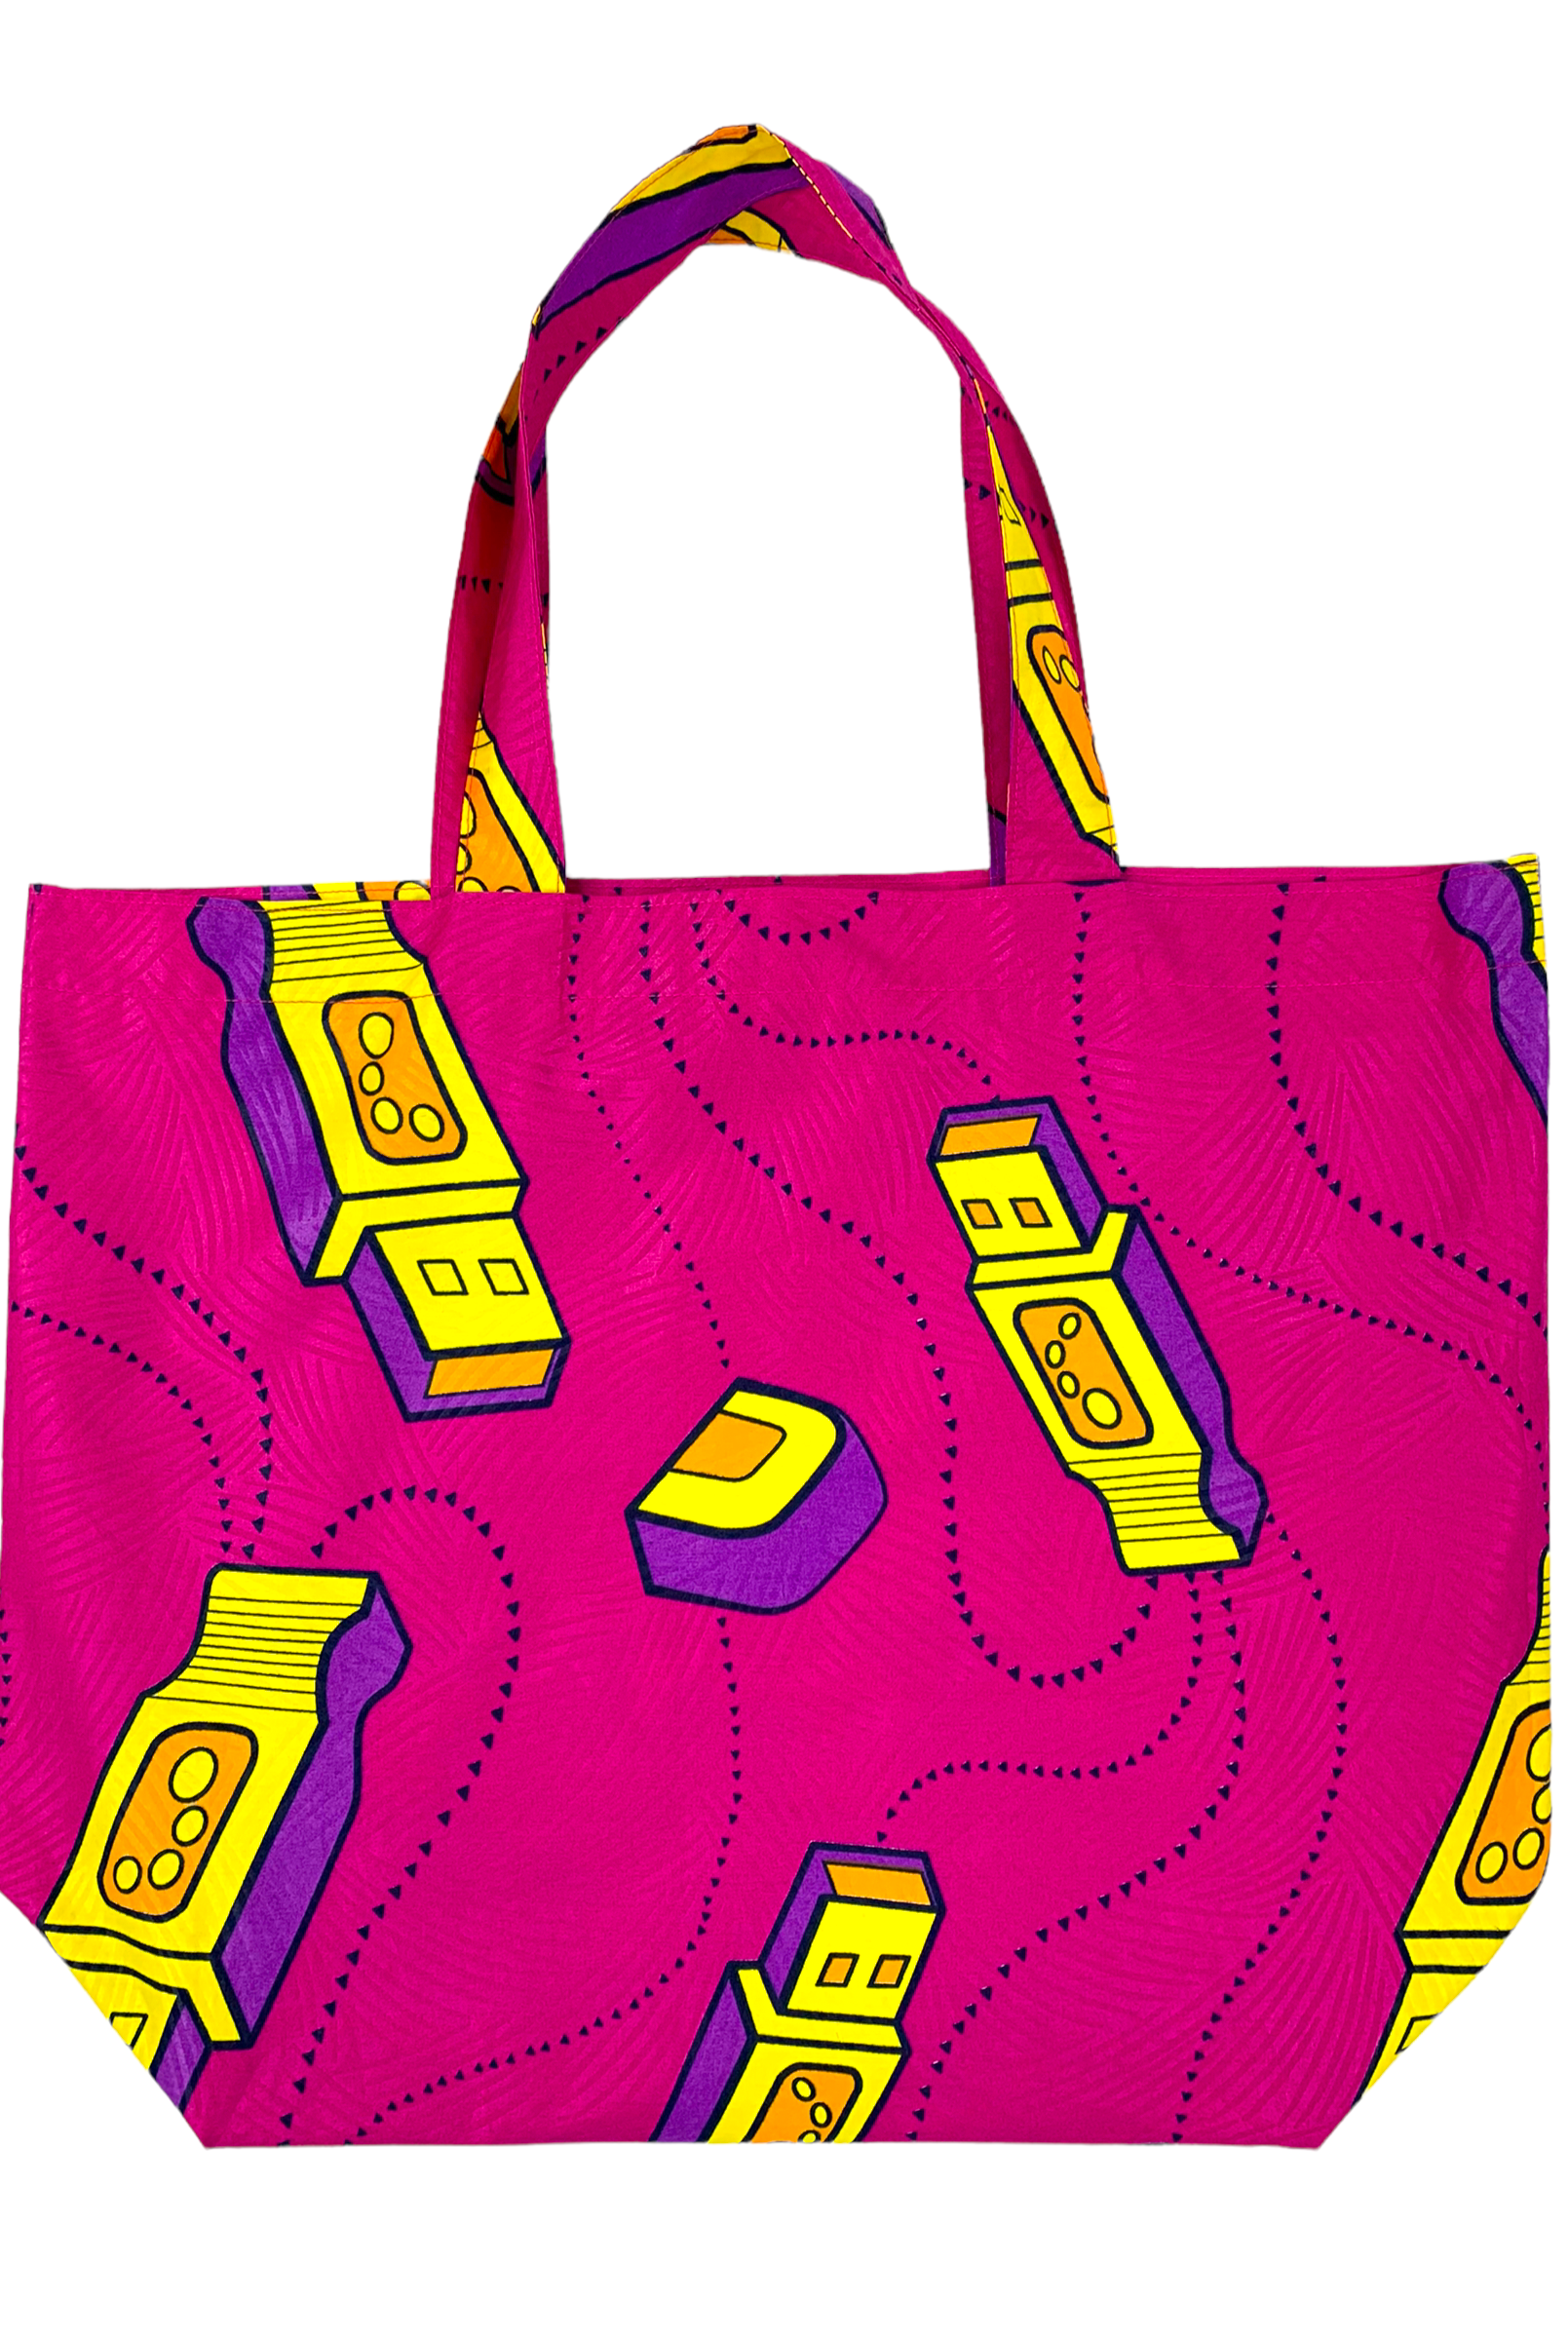 AFRICAN FABRIC TOTE BAG